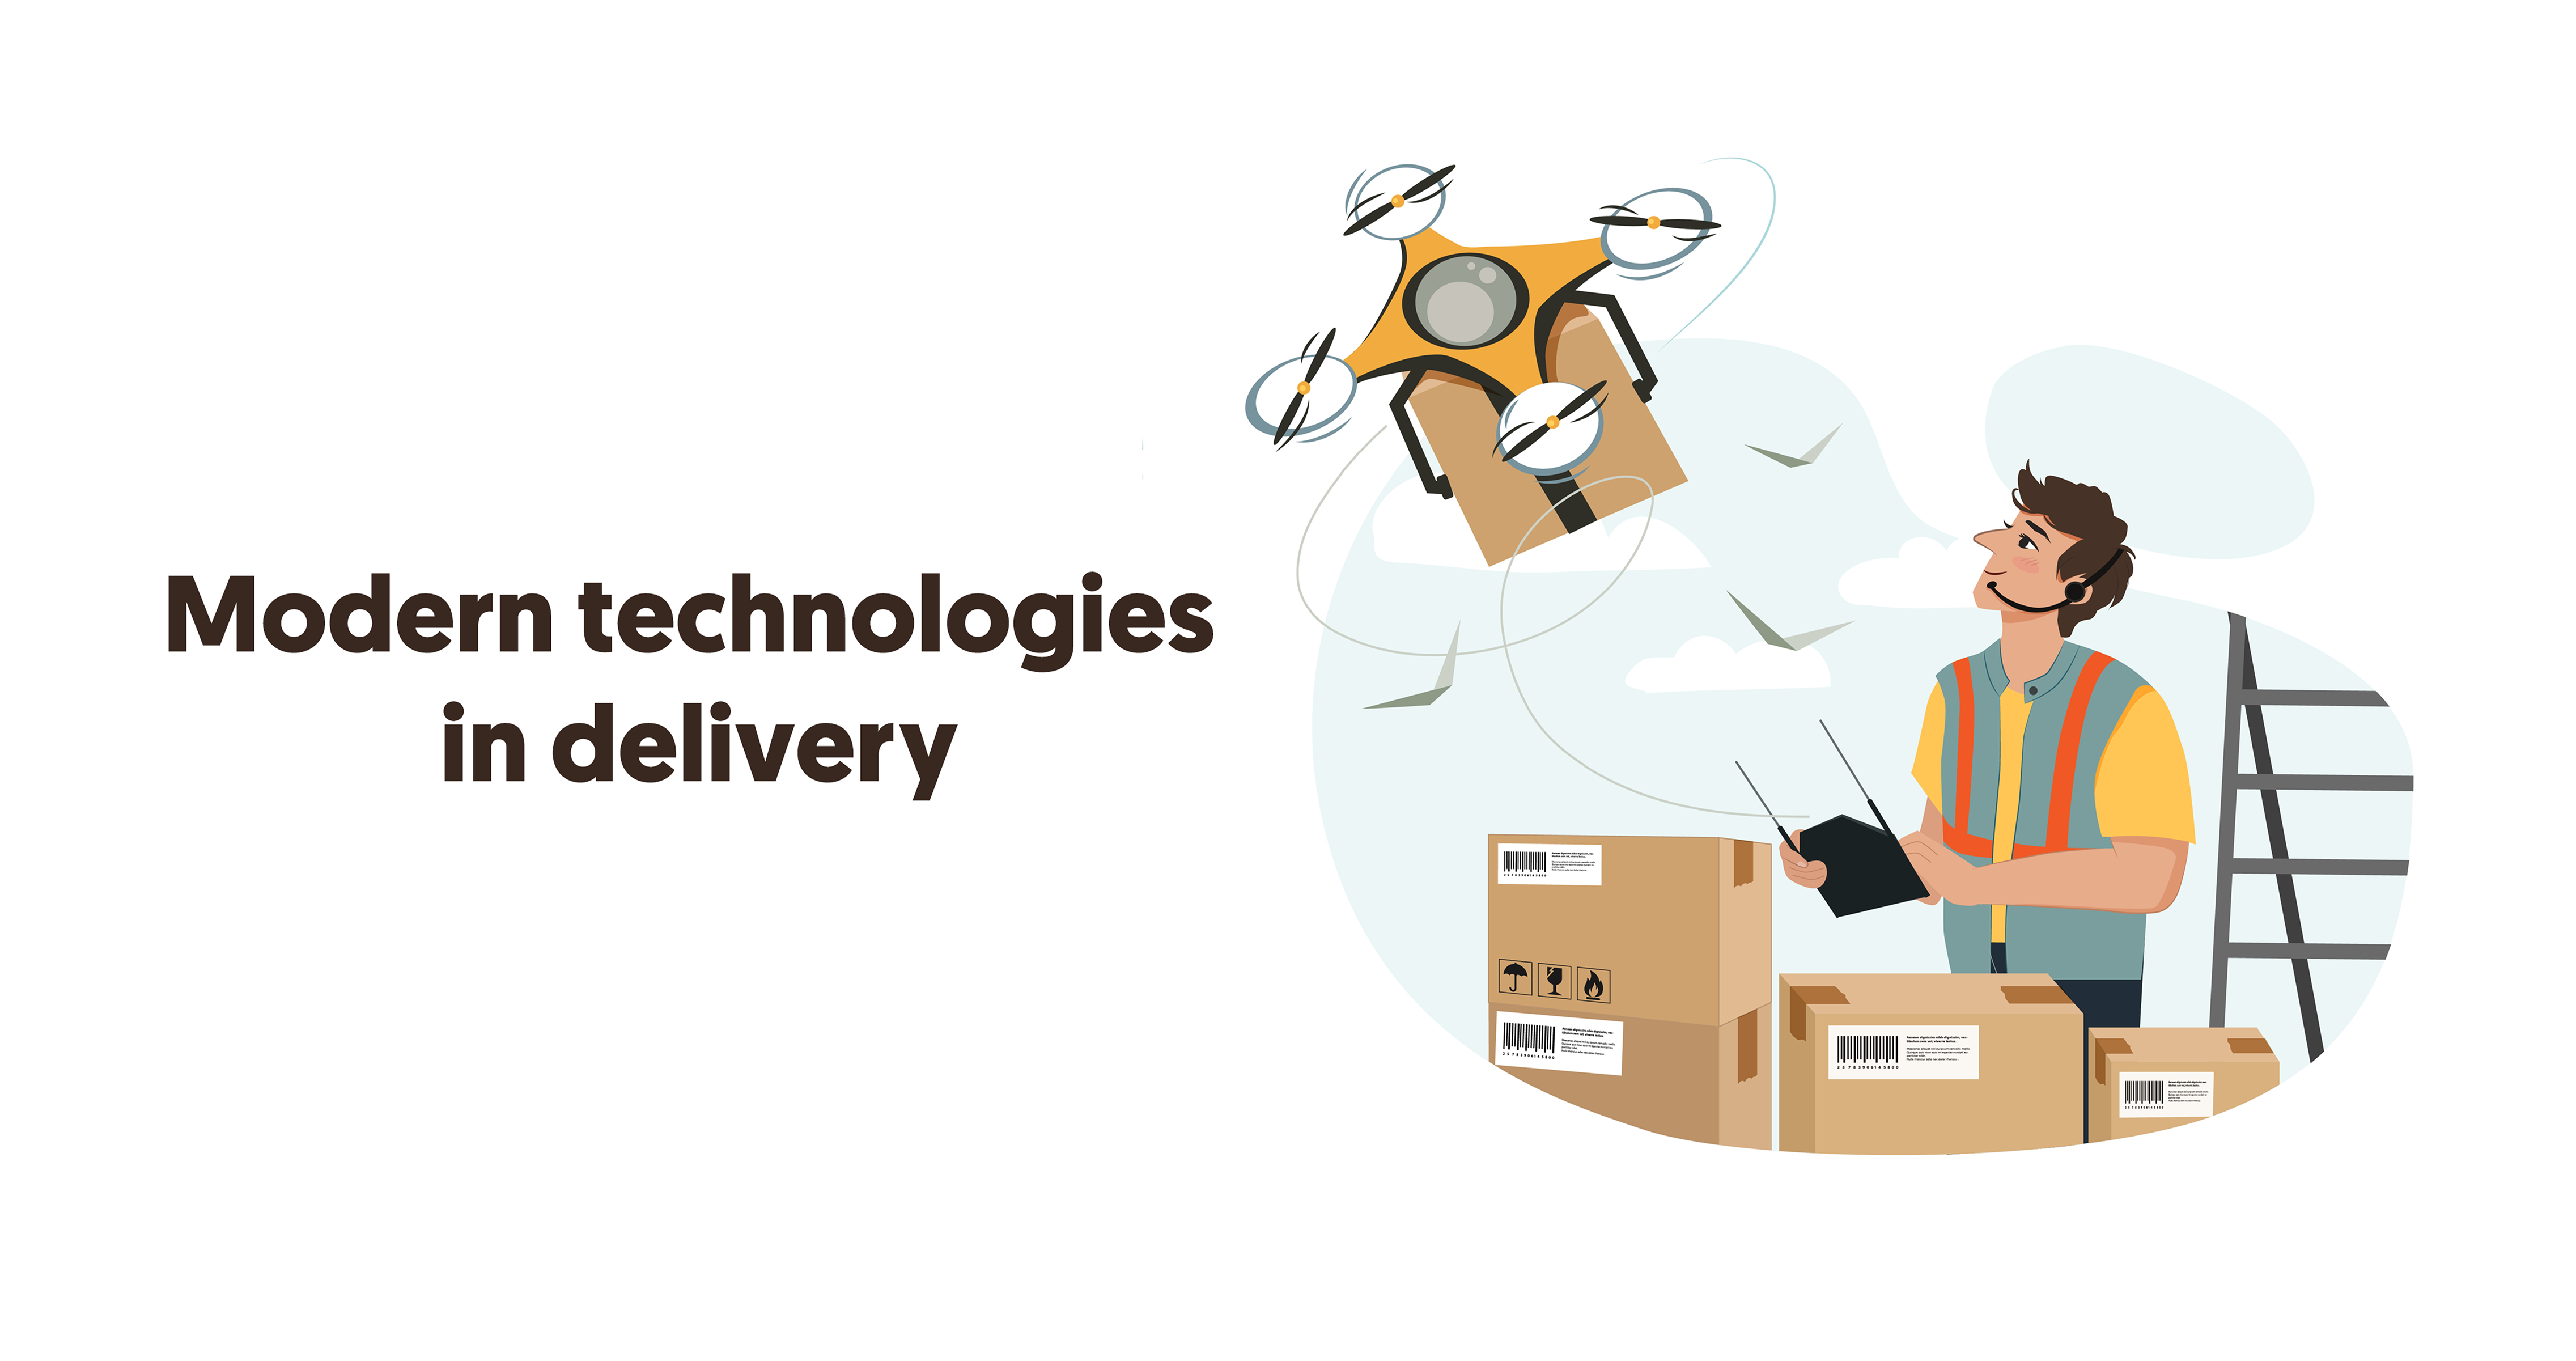 Modern technologies in delivery business